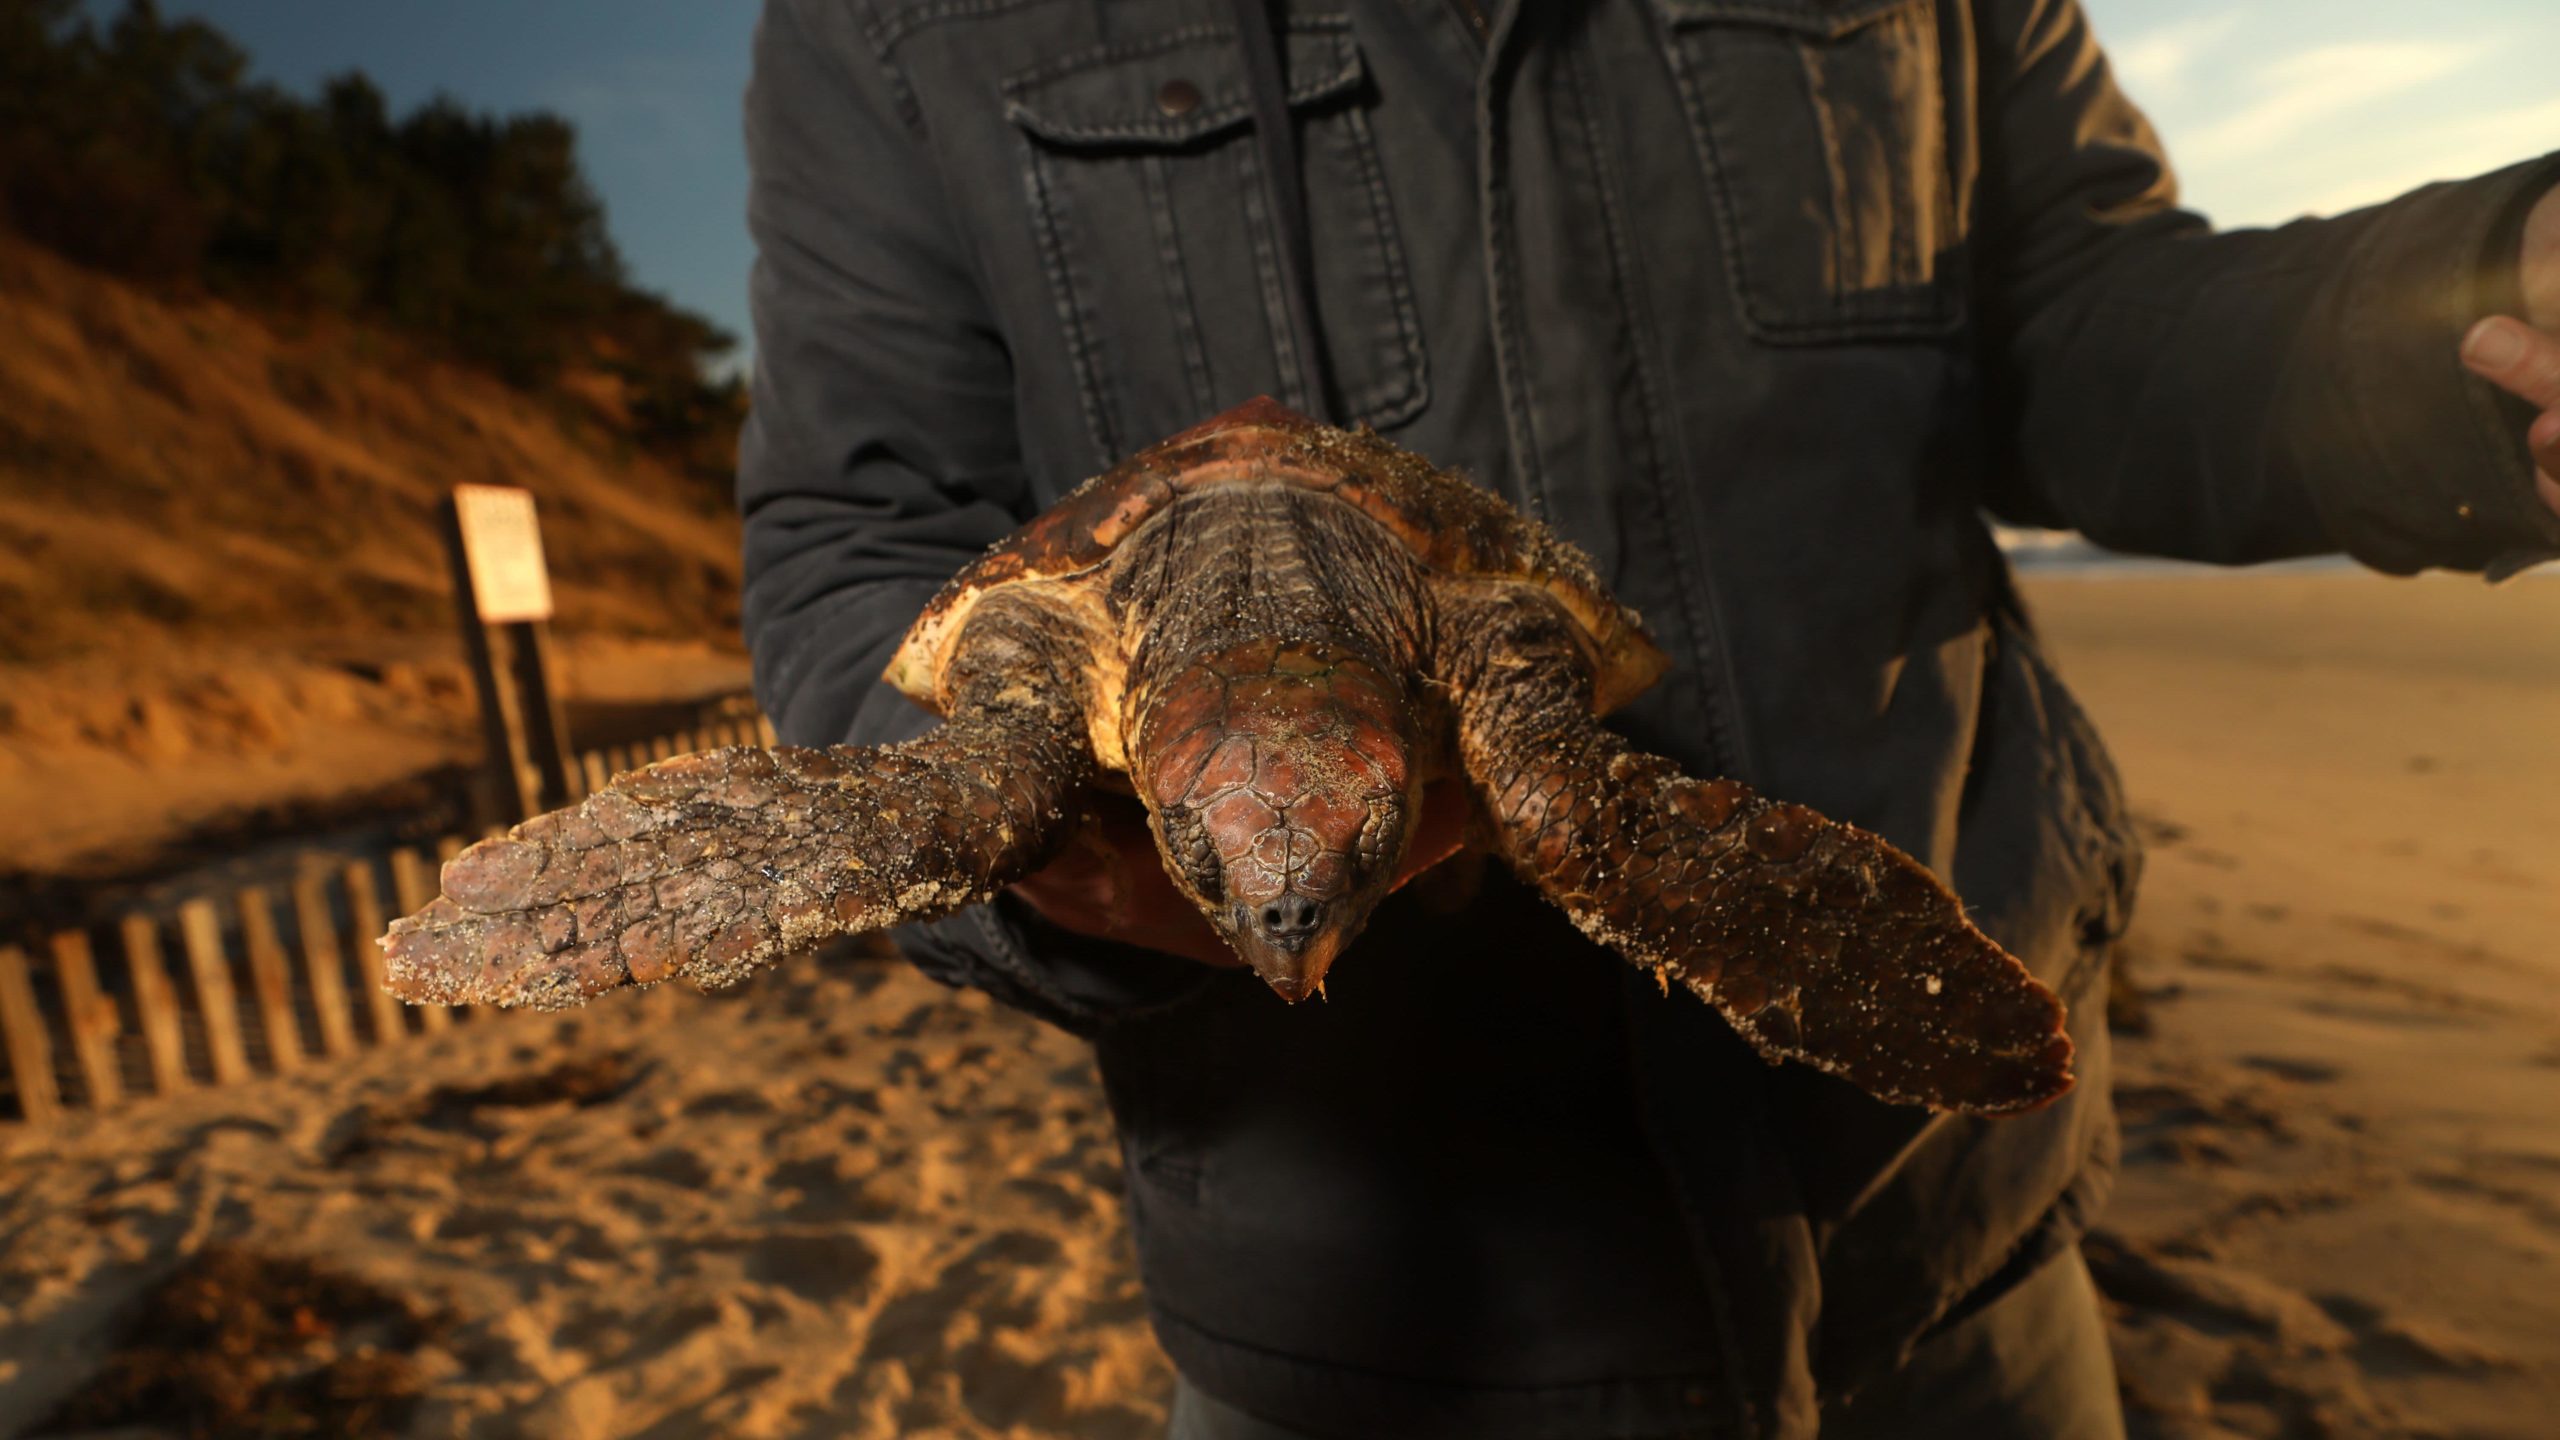 Bob Prescott, Mass Audubon Sea Turtle Program director, holds a cold-stunned sea turtle rescued off of Great Hallow beach in Cape Cod on Dec. 3, 2020.  (Photo: Lauren Owens Lambert / AFP, Getty Images)